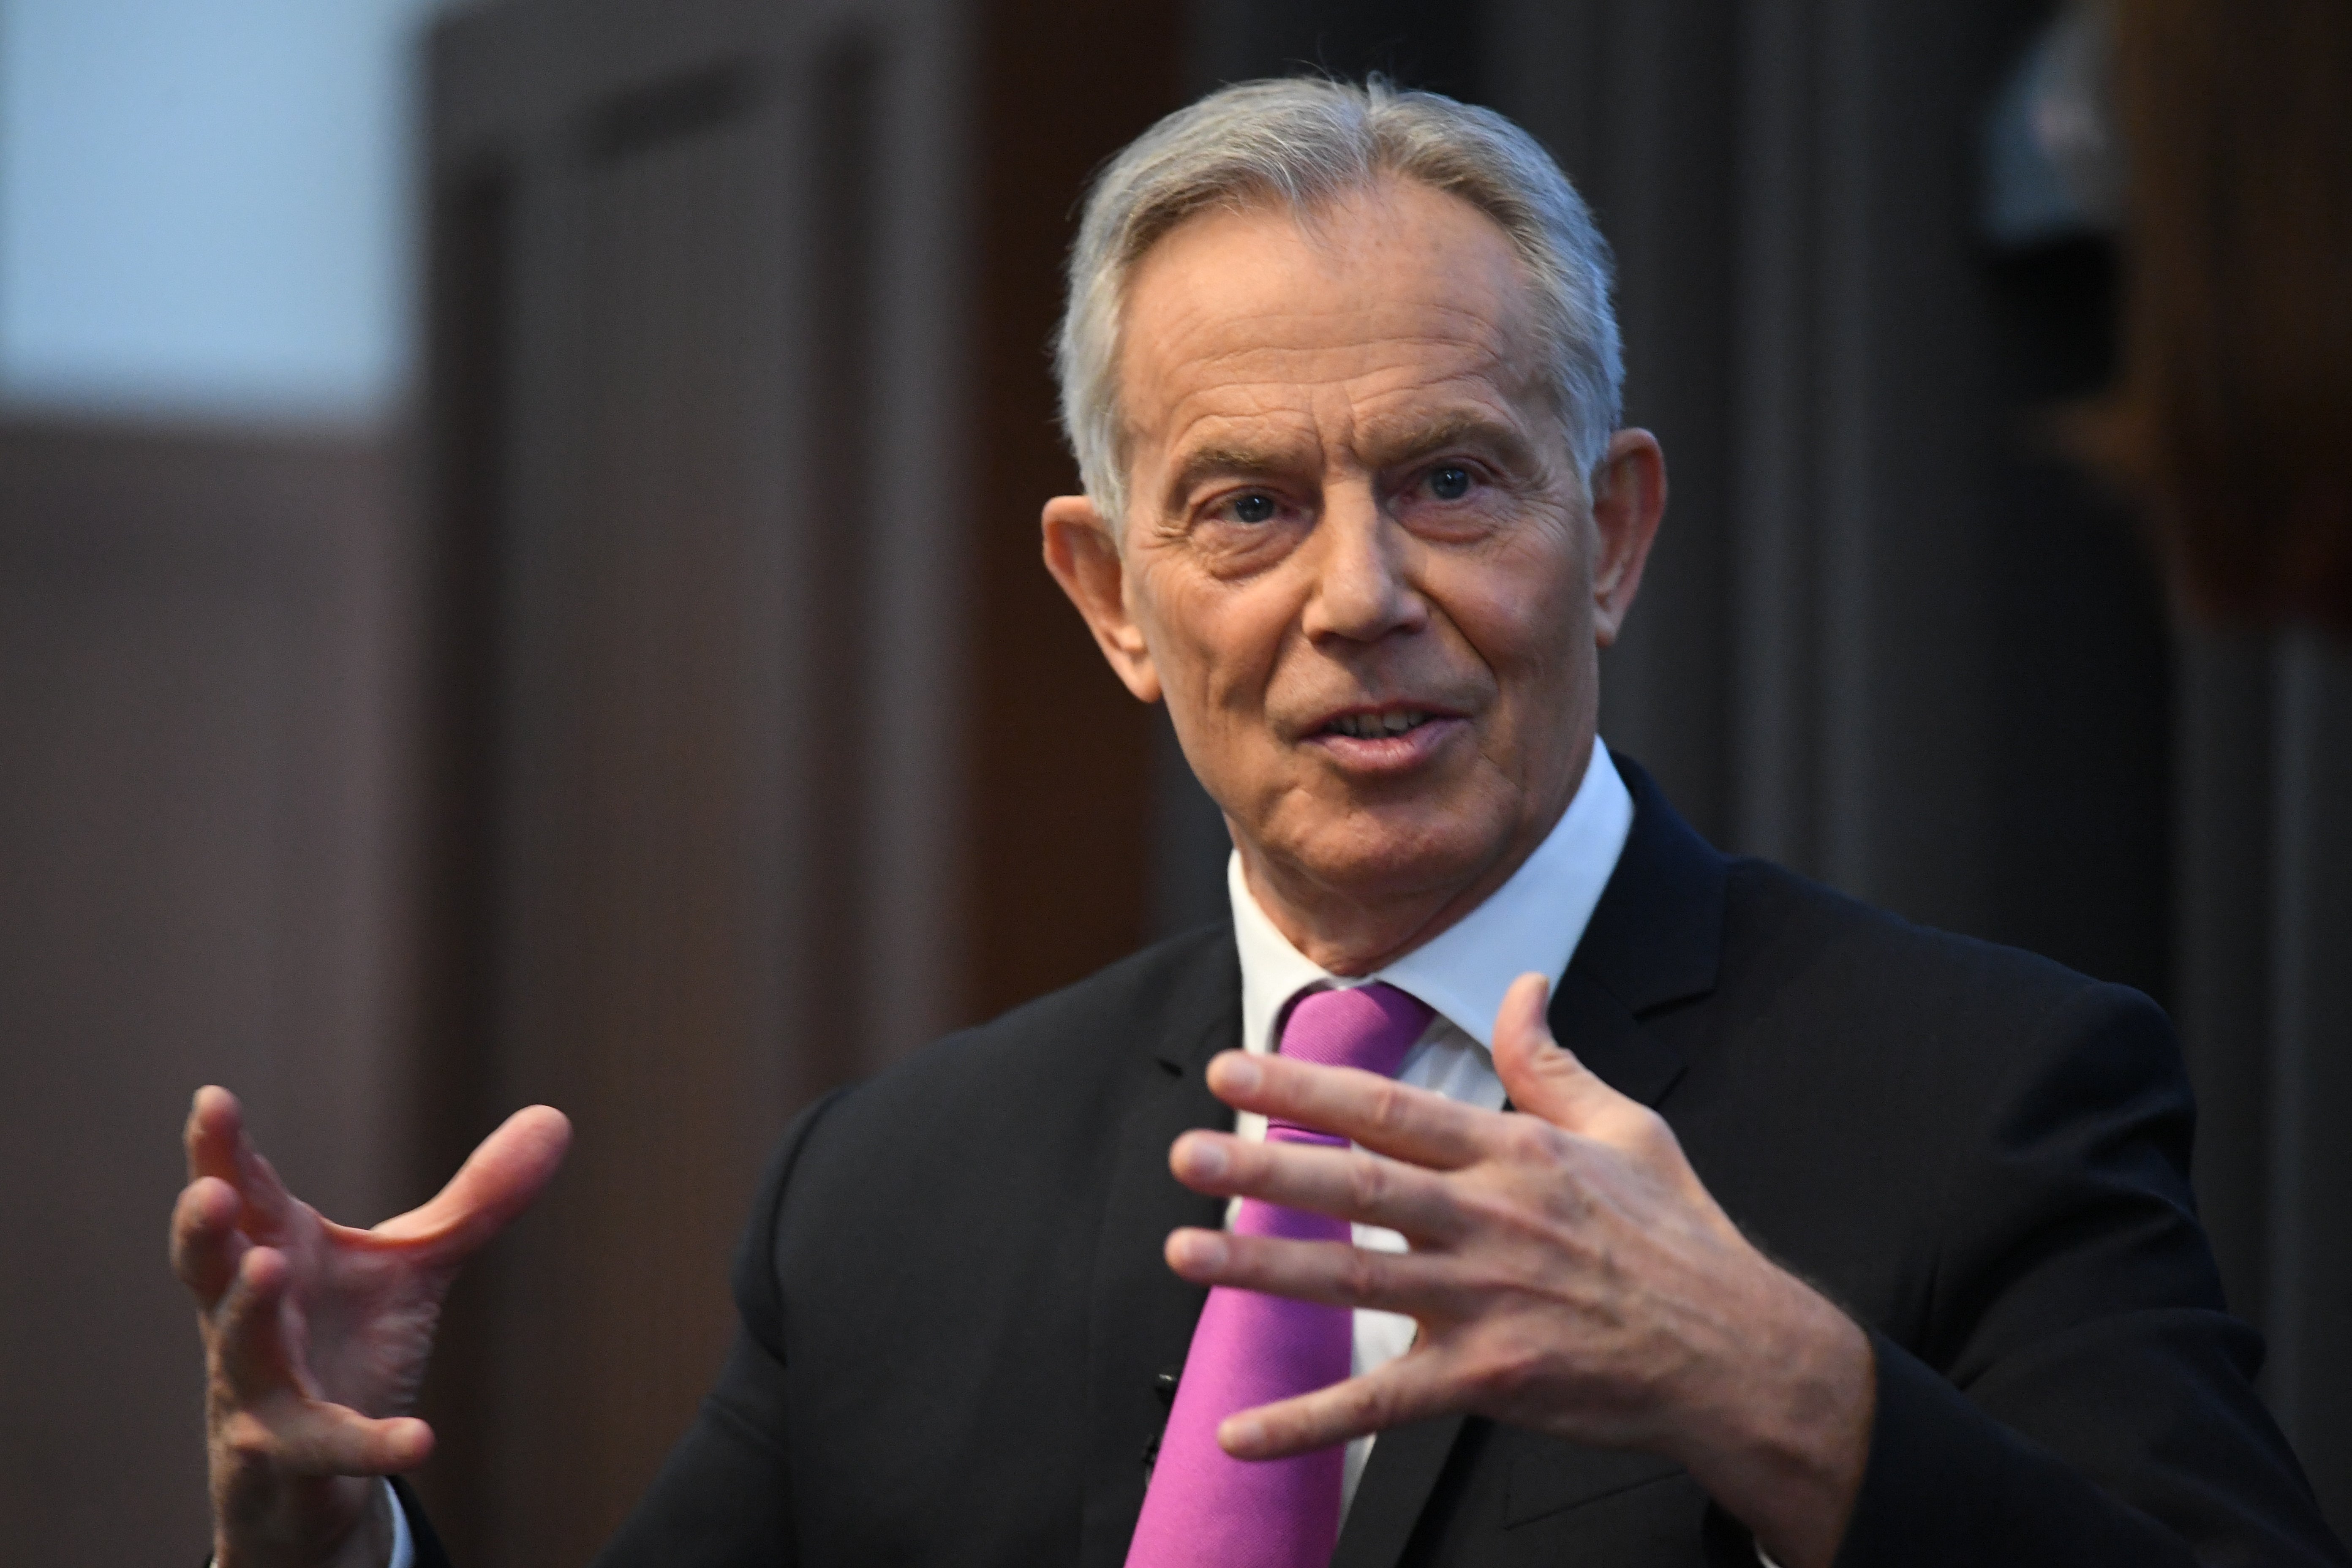 A petition calling for former prime minister Tony Blair to be stripped of his knighthood is approaching 500,000 signatures on change.org